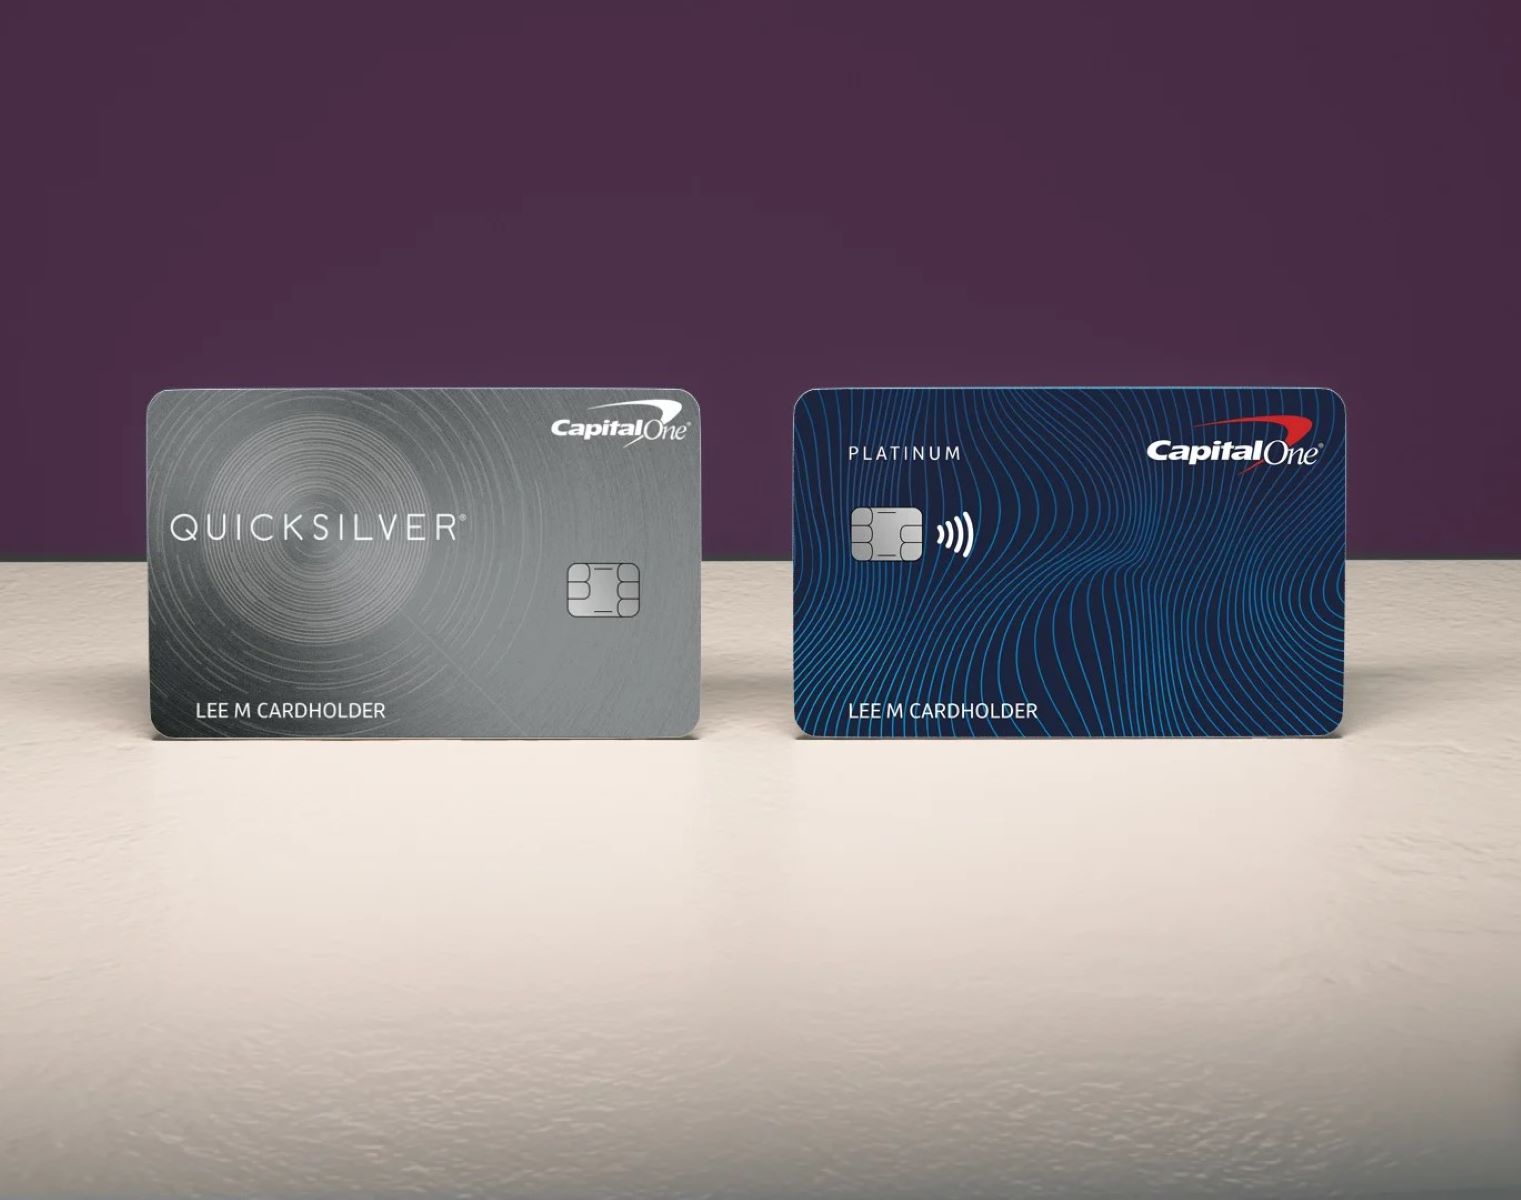 Which Credit Card Is Better Capital One Platinum Or Quicksilver